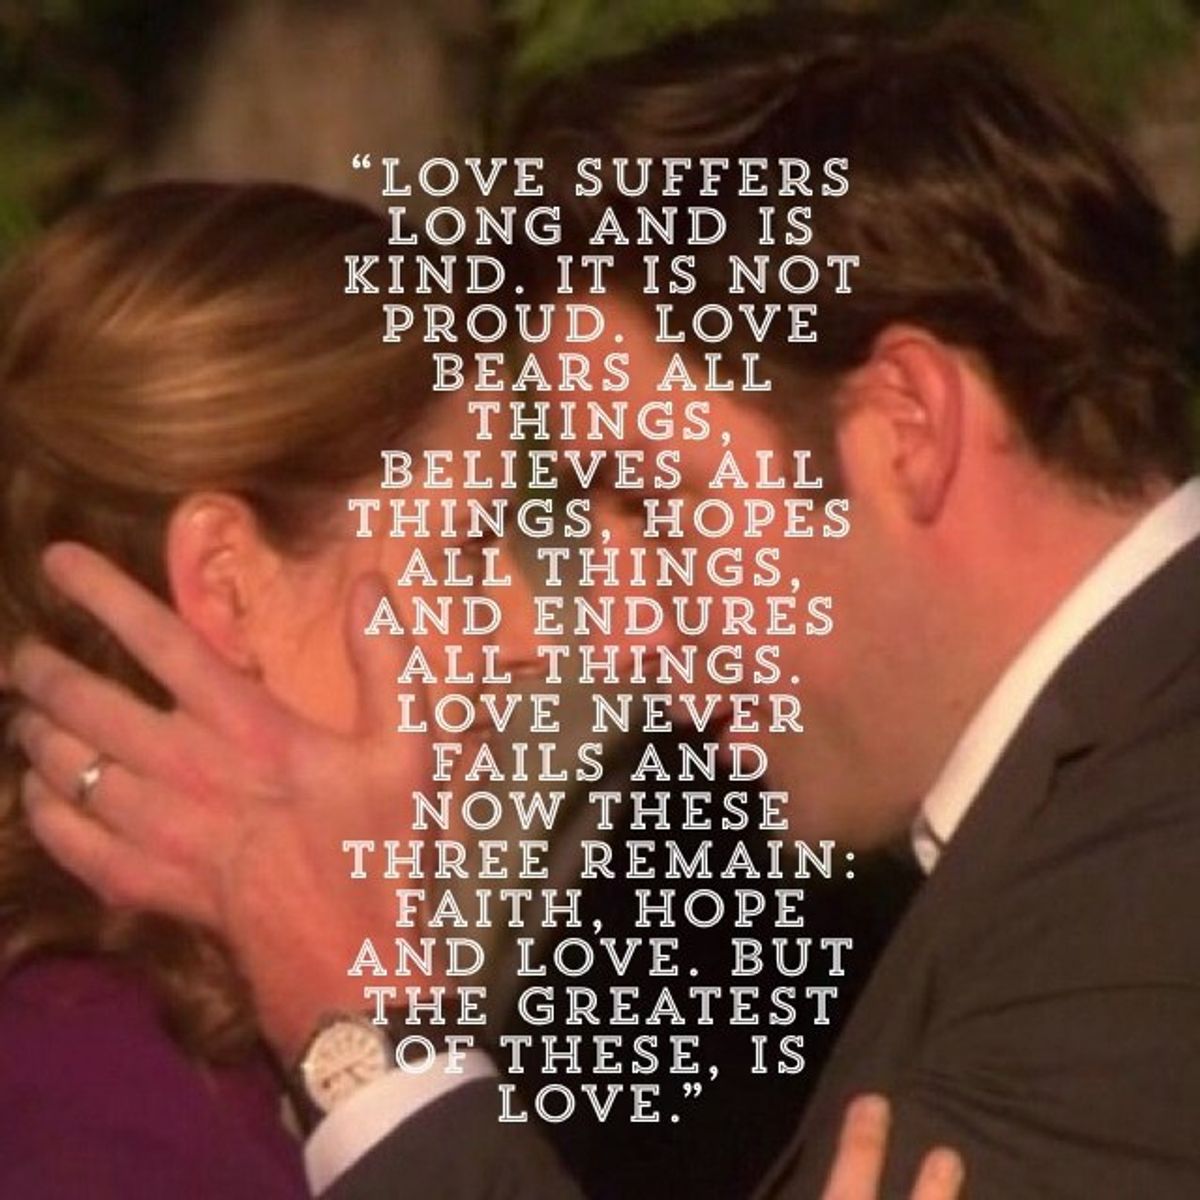 12 Reasons Jim and Pam are ACTUALLY Relationship Goals